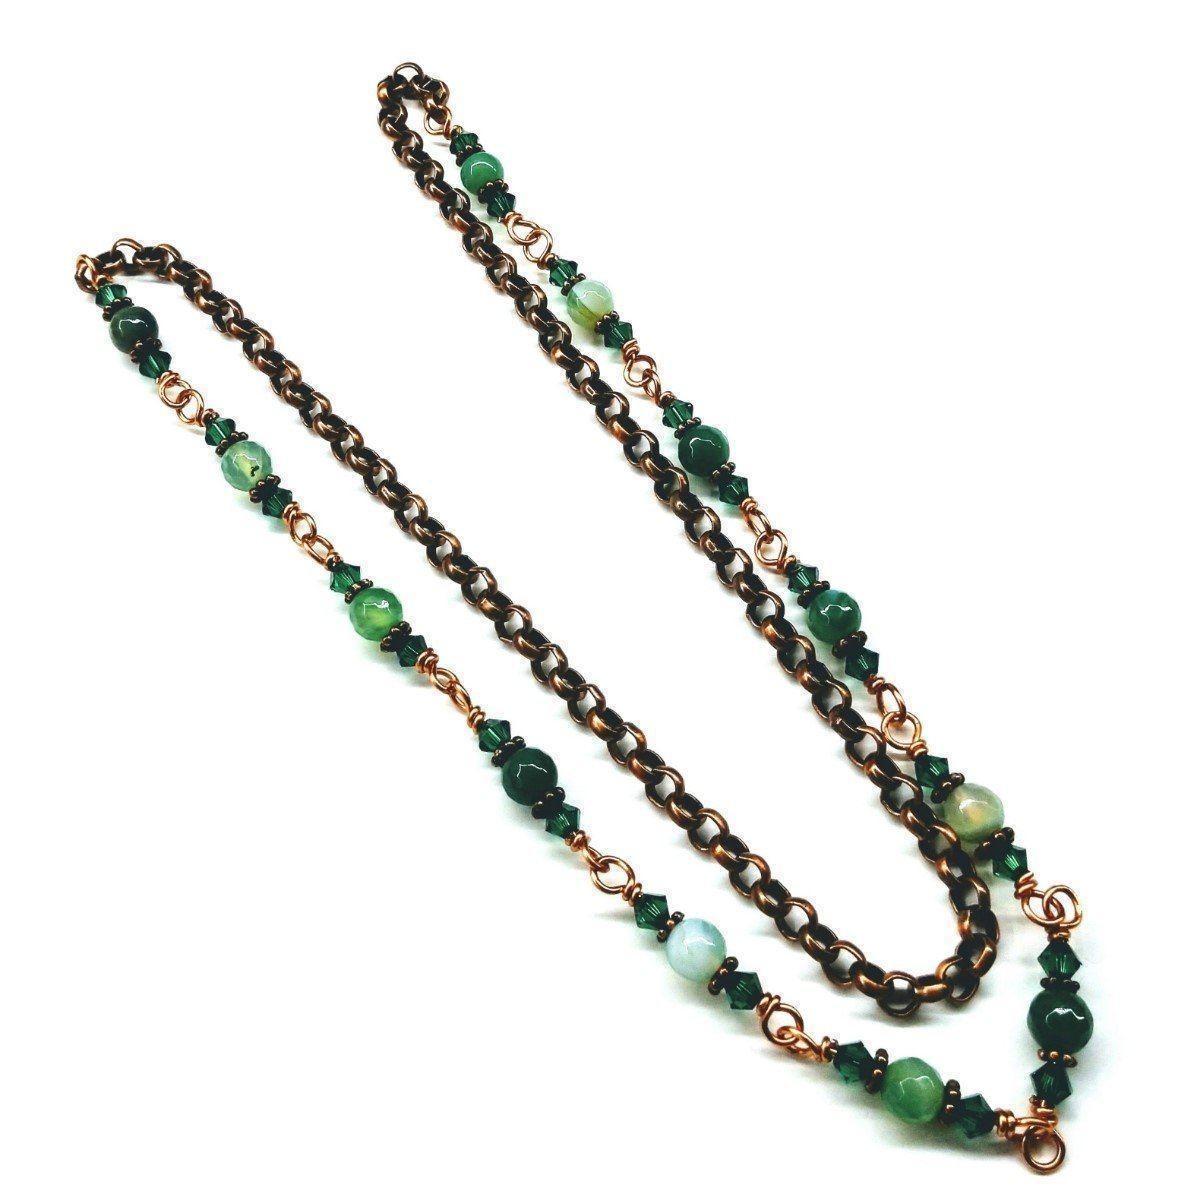 Emerald Agate Gemstone Wire Wrapped Necklace - 24 Inches Length Bijou Her